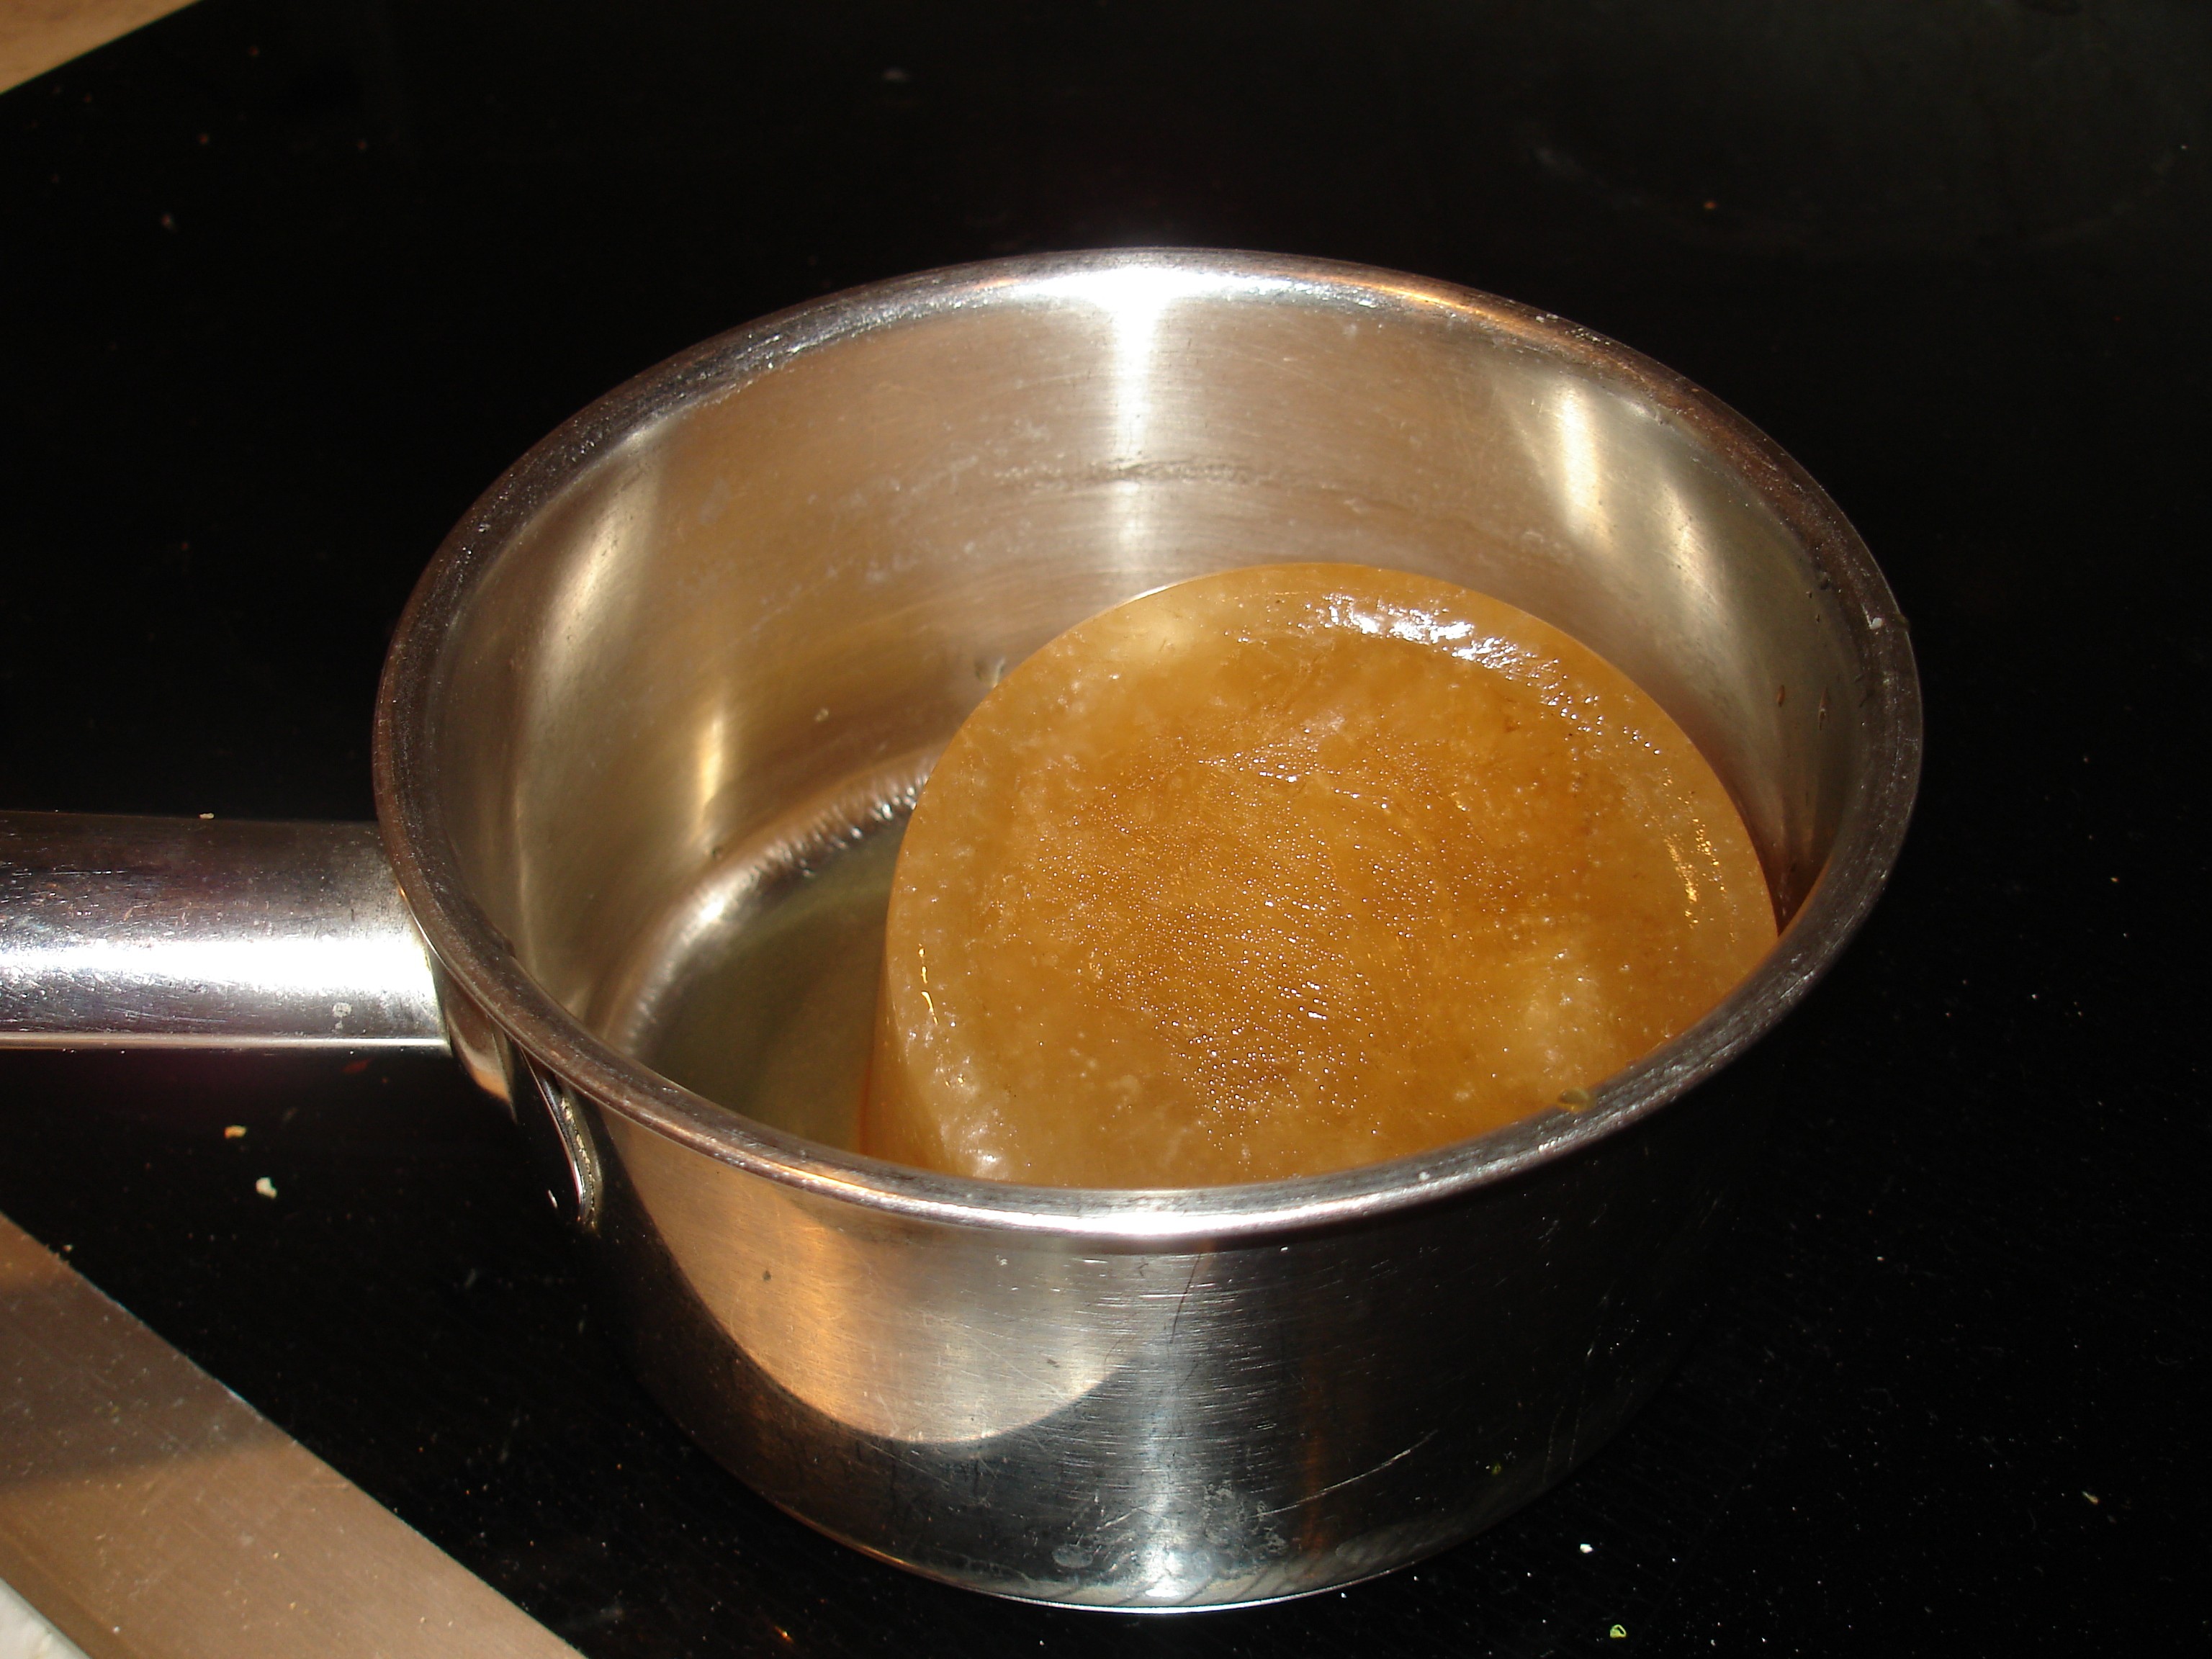 Lead Toxicity of Bone Broth – Should You Worry?